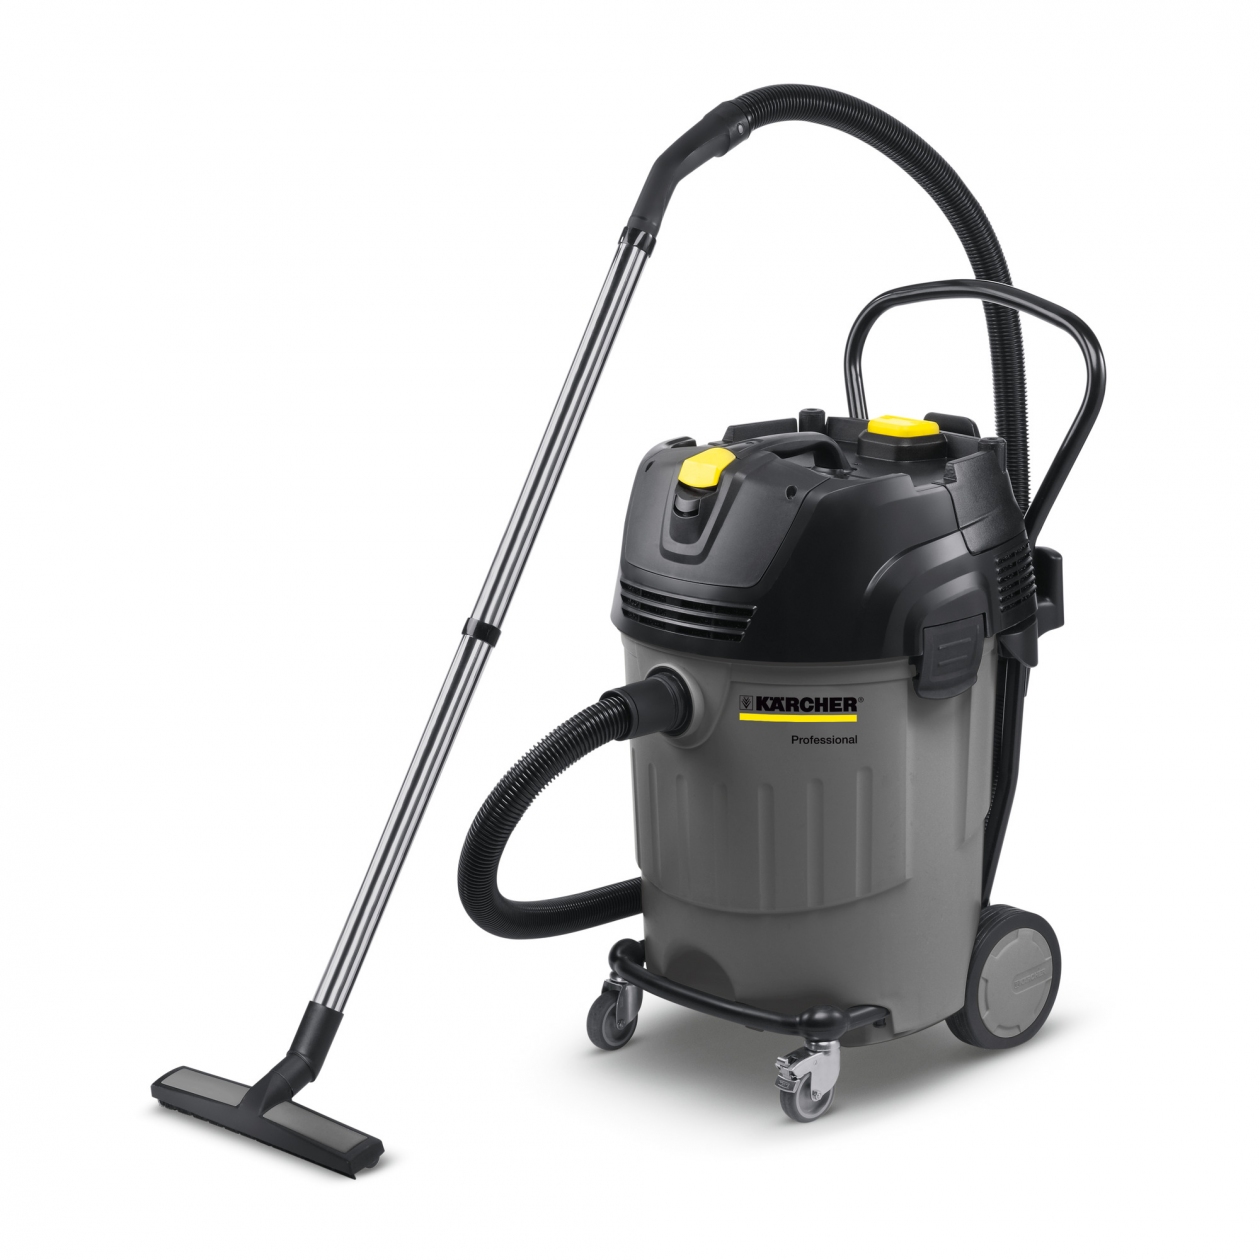 Buy Online Wet and Dry Vacuum Cleaner Accessories South West, UK